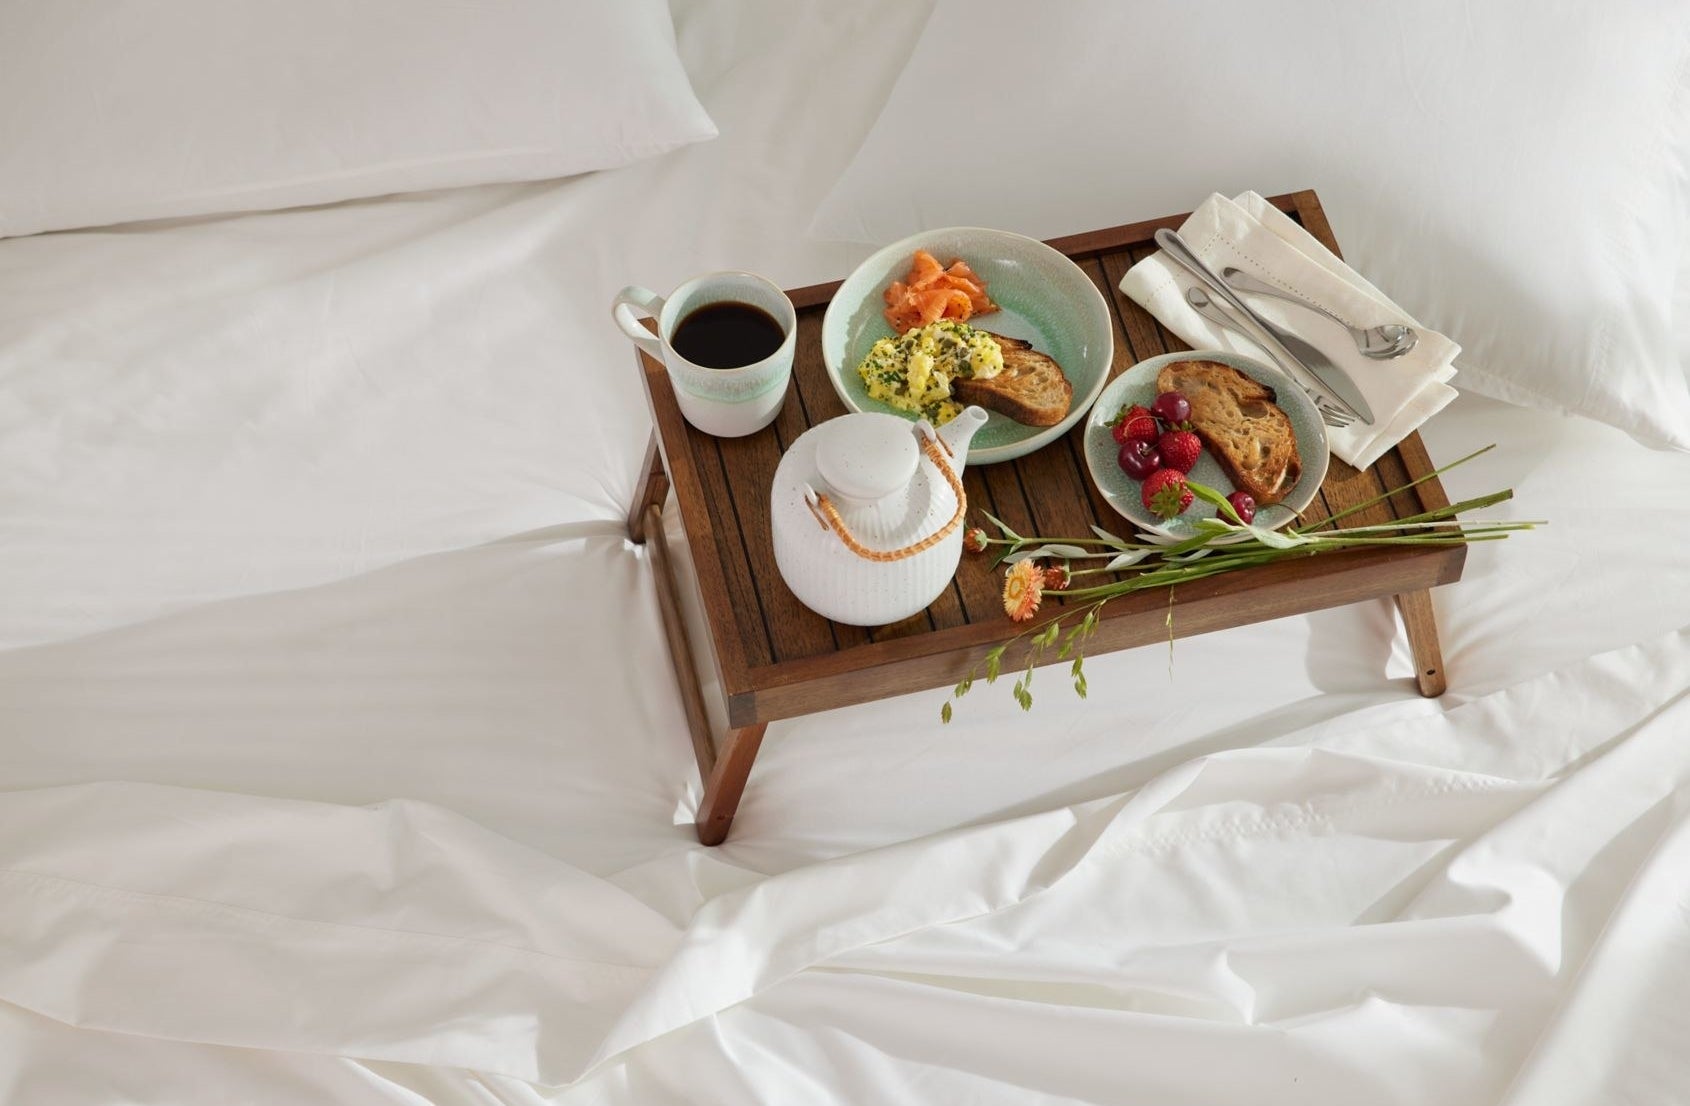 A walnut bed tray with breakfast food atop